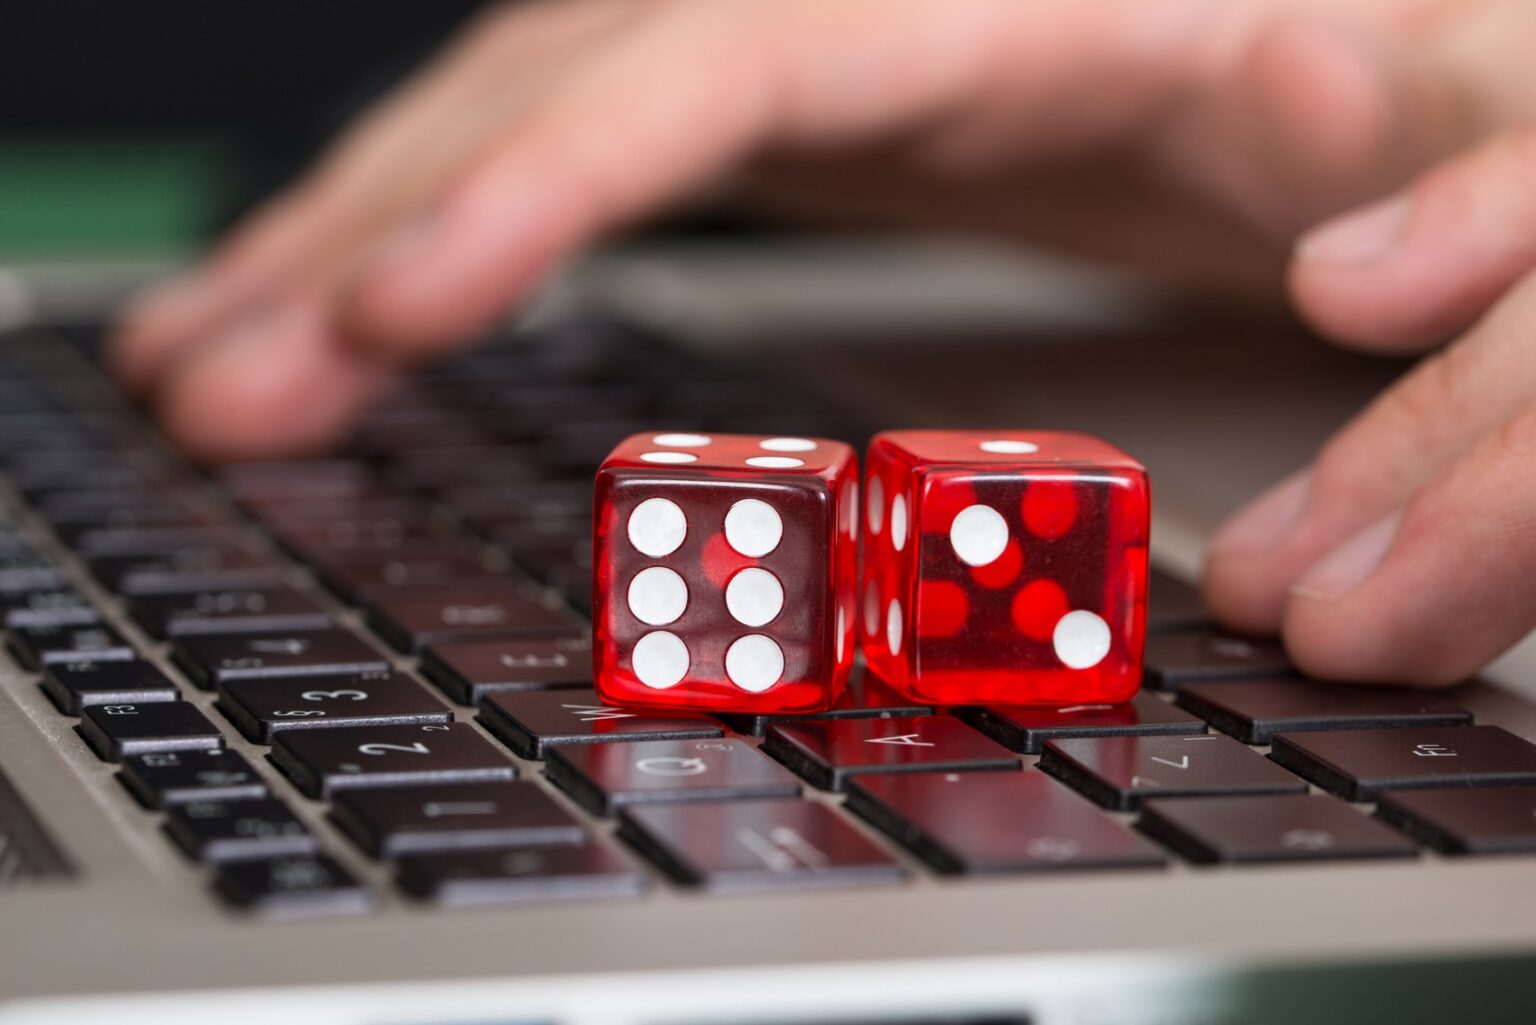 Picking the right online casino can be a tough decision. Here are some tips on how to choose the right casino for you.